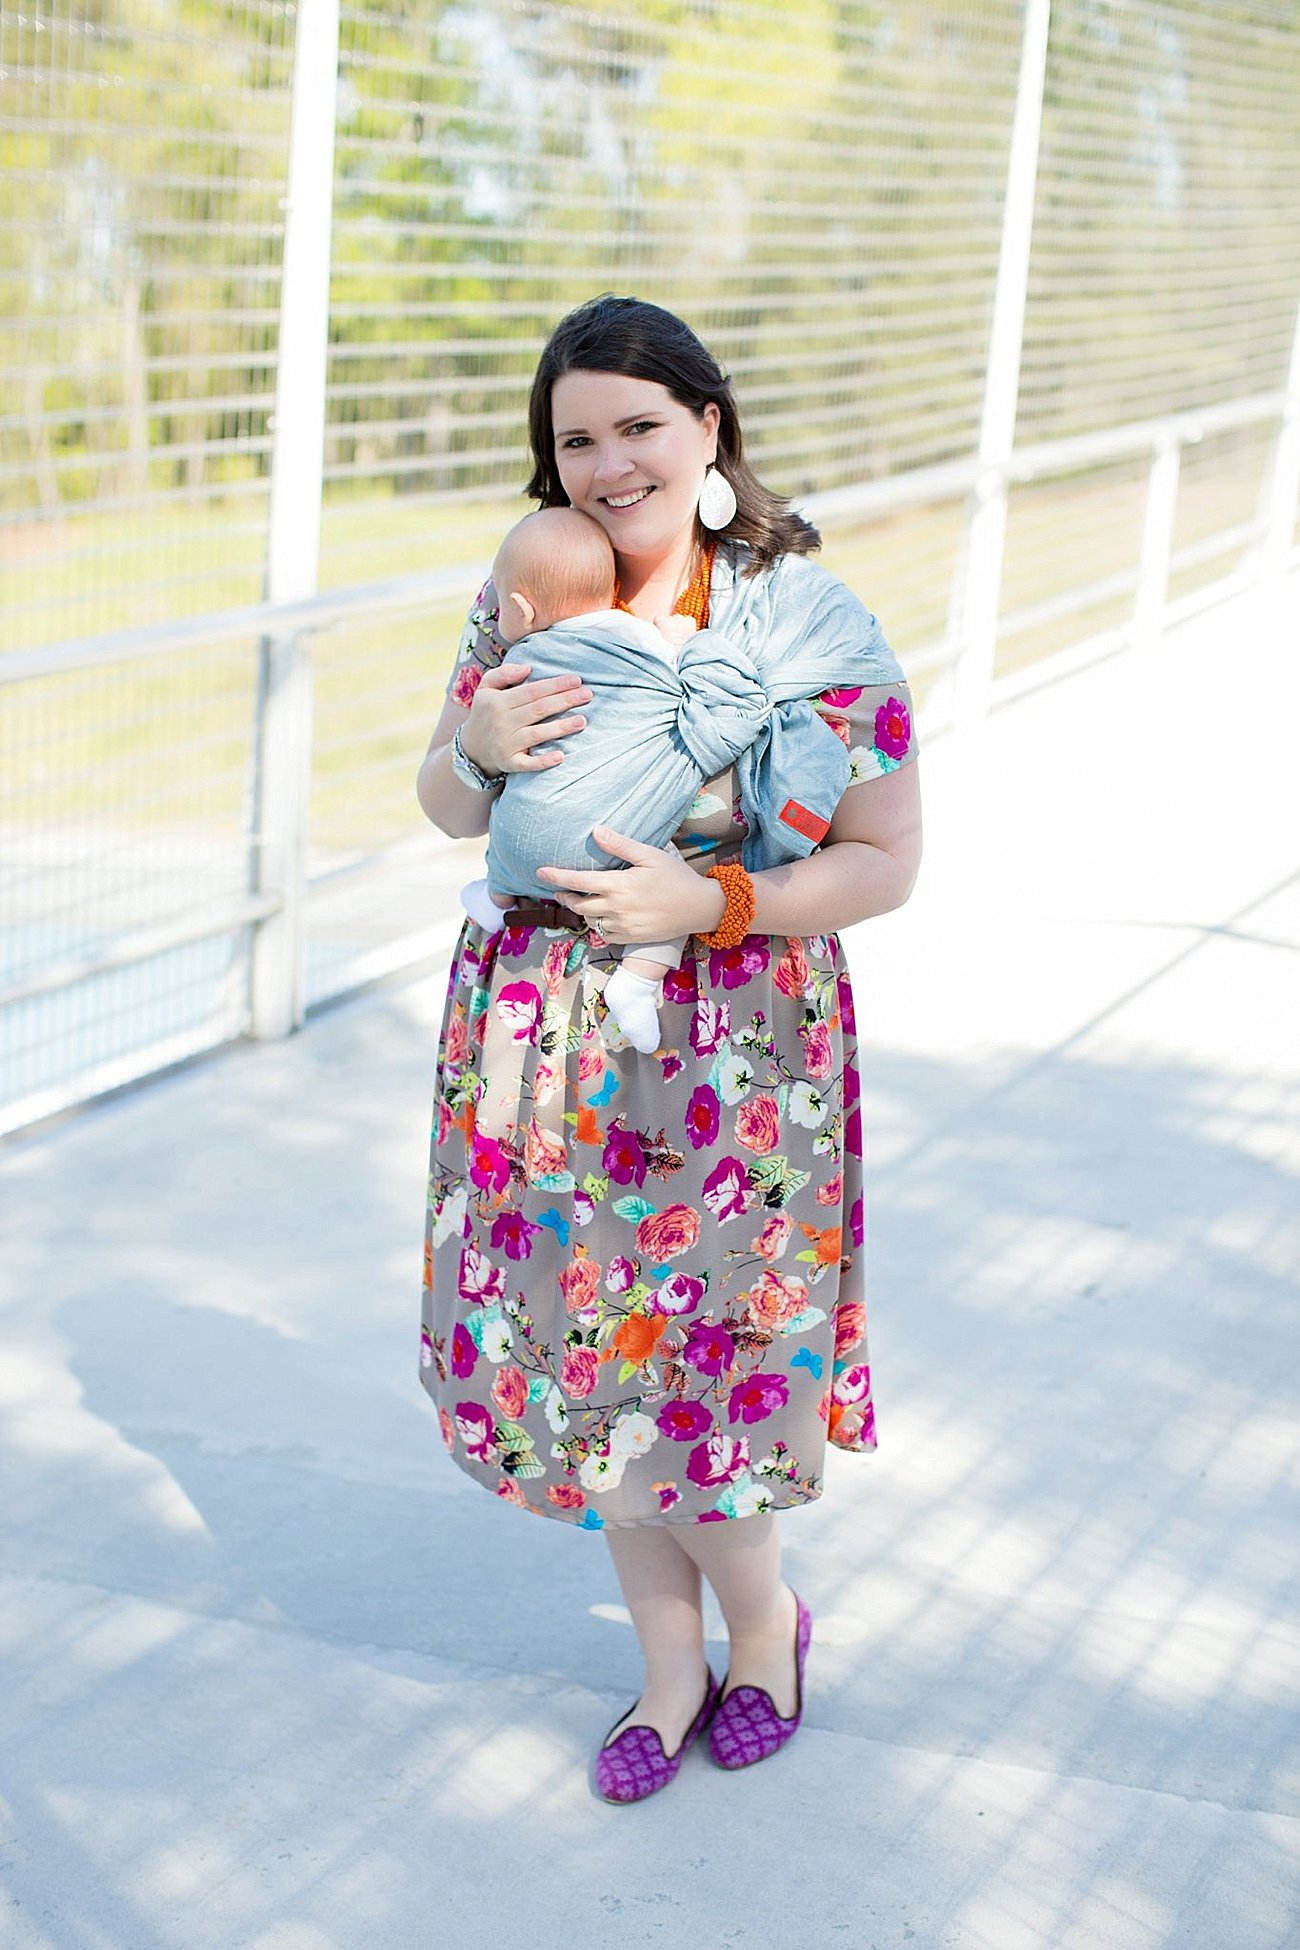 LulaRoe Floral Amelia Dress, The Root Collective Millie Smoking Shoe, Made for Freedom Lily Necklace and Bracelet, Sseko Designs Leather Clutch, Nickel and Suede earrings, Sakura Bloom Catalina ring sling | Mom Style | North Carolina Fashion & Style Blogger (8)